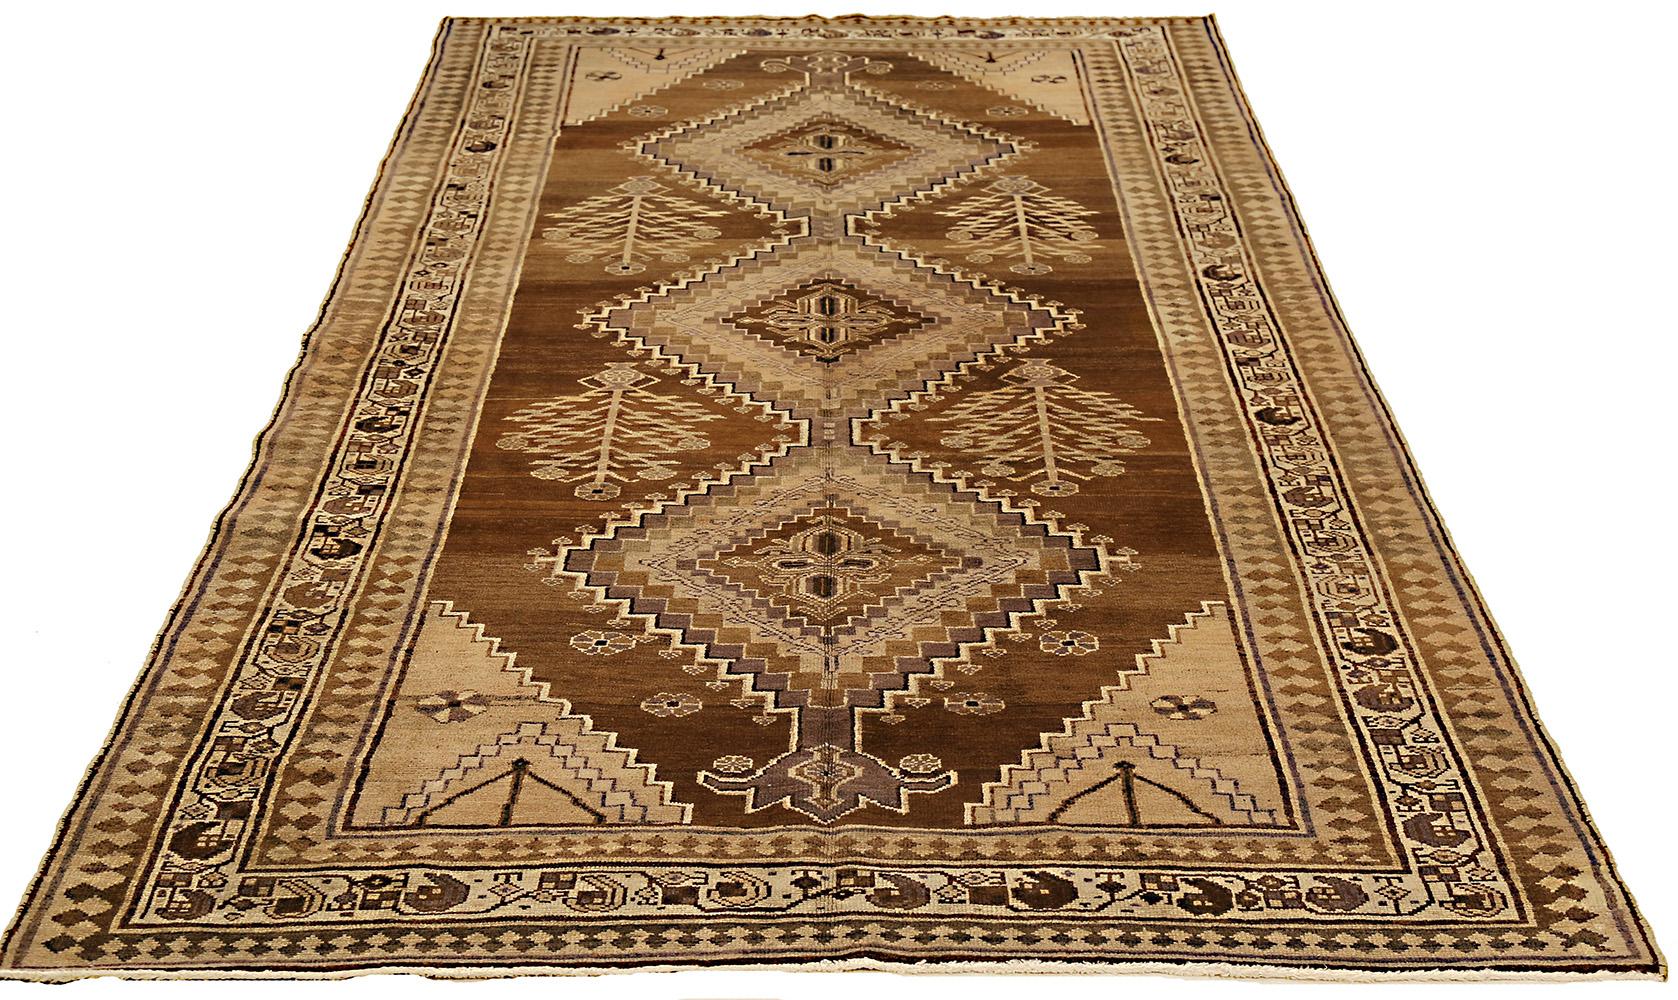 Antique Persian rug handwoven from the finest sheep’s wool and colored with all-natural vegetable dyes that are safe for humans and pets. It’s a traditional Hamedan design featuring floral patterns in brown and black on a mixed brown and beige